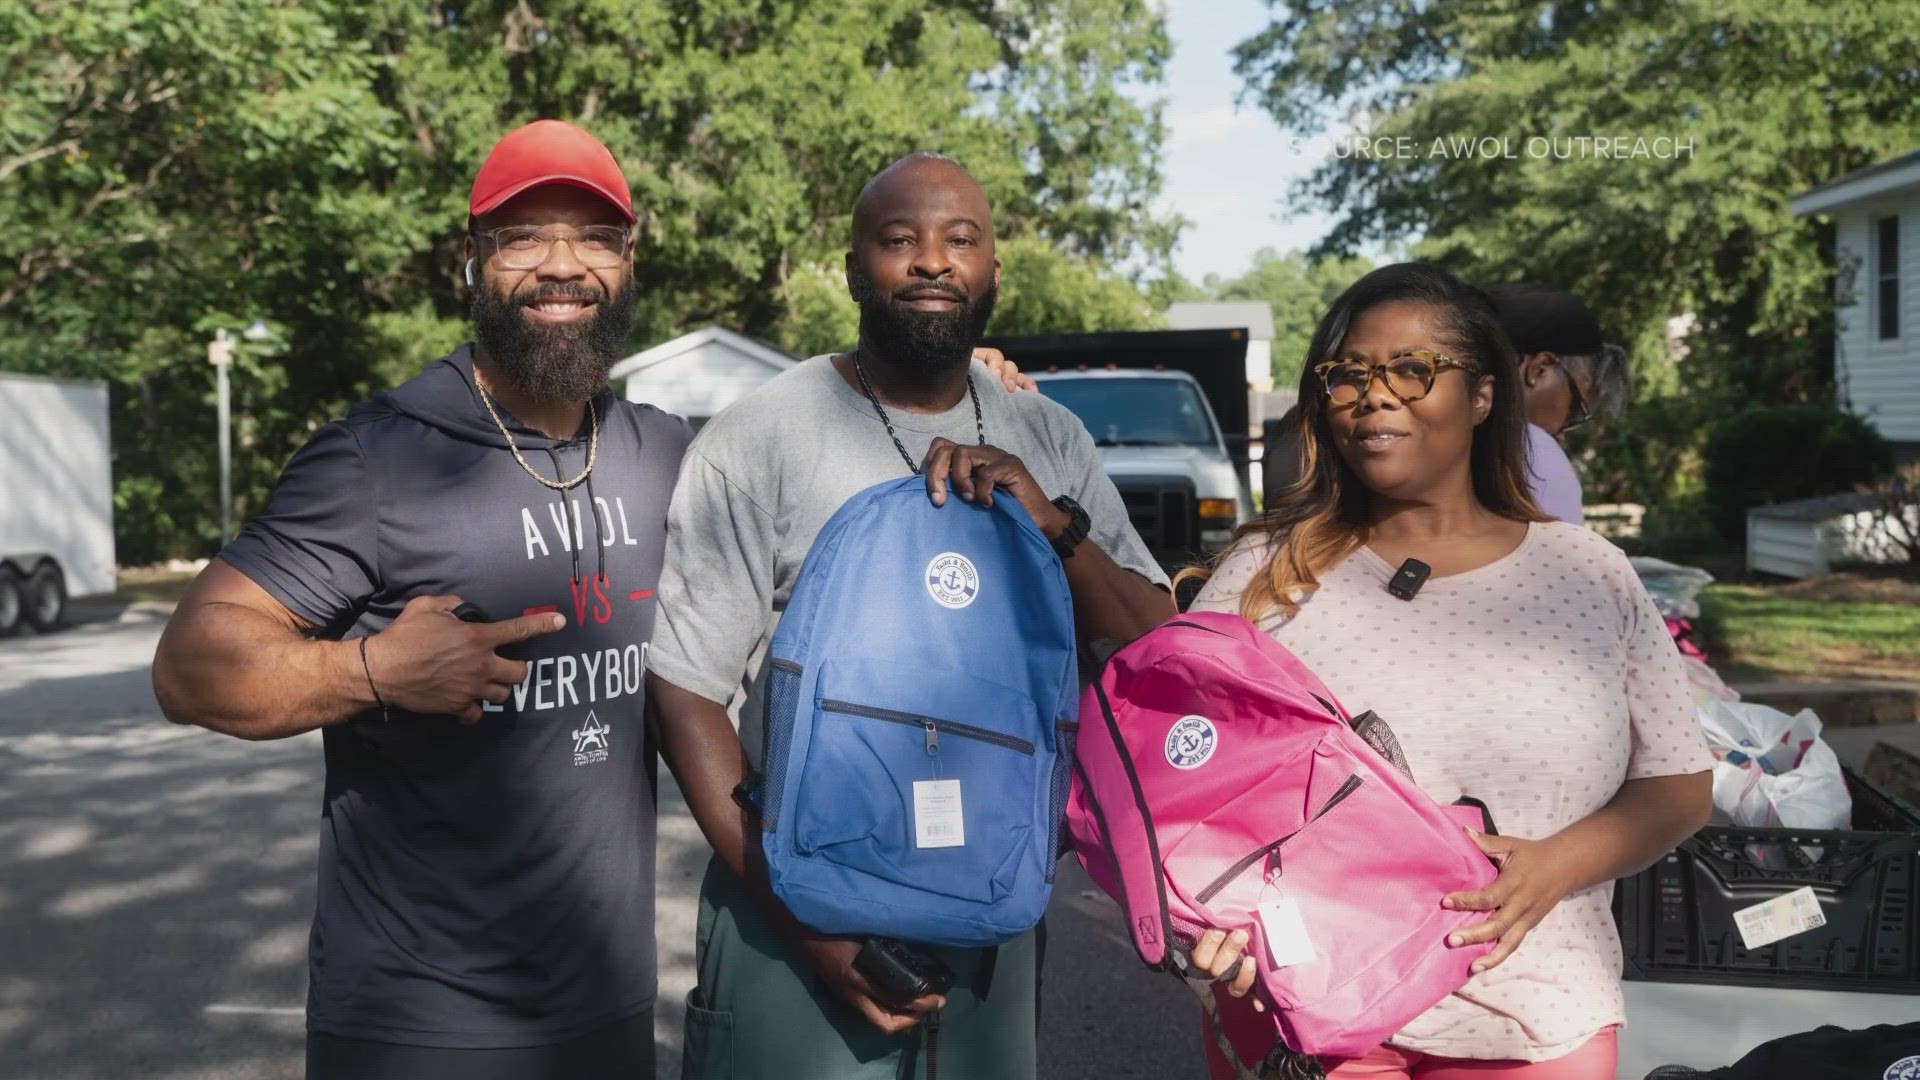 AWOL Outreach in Greensboro partnered with the Davidson Correctional Center for a school supply drive.